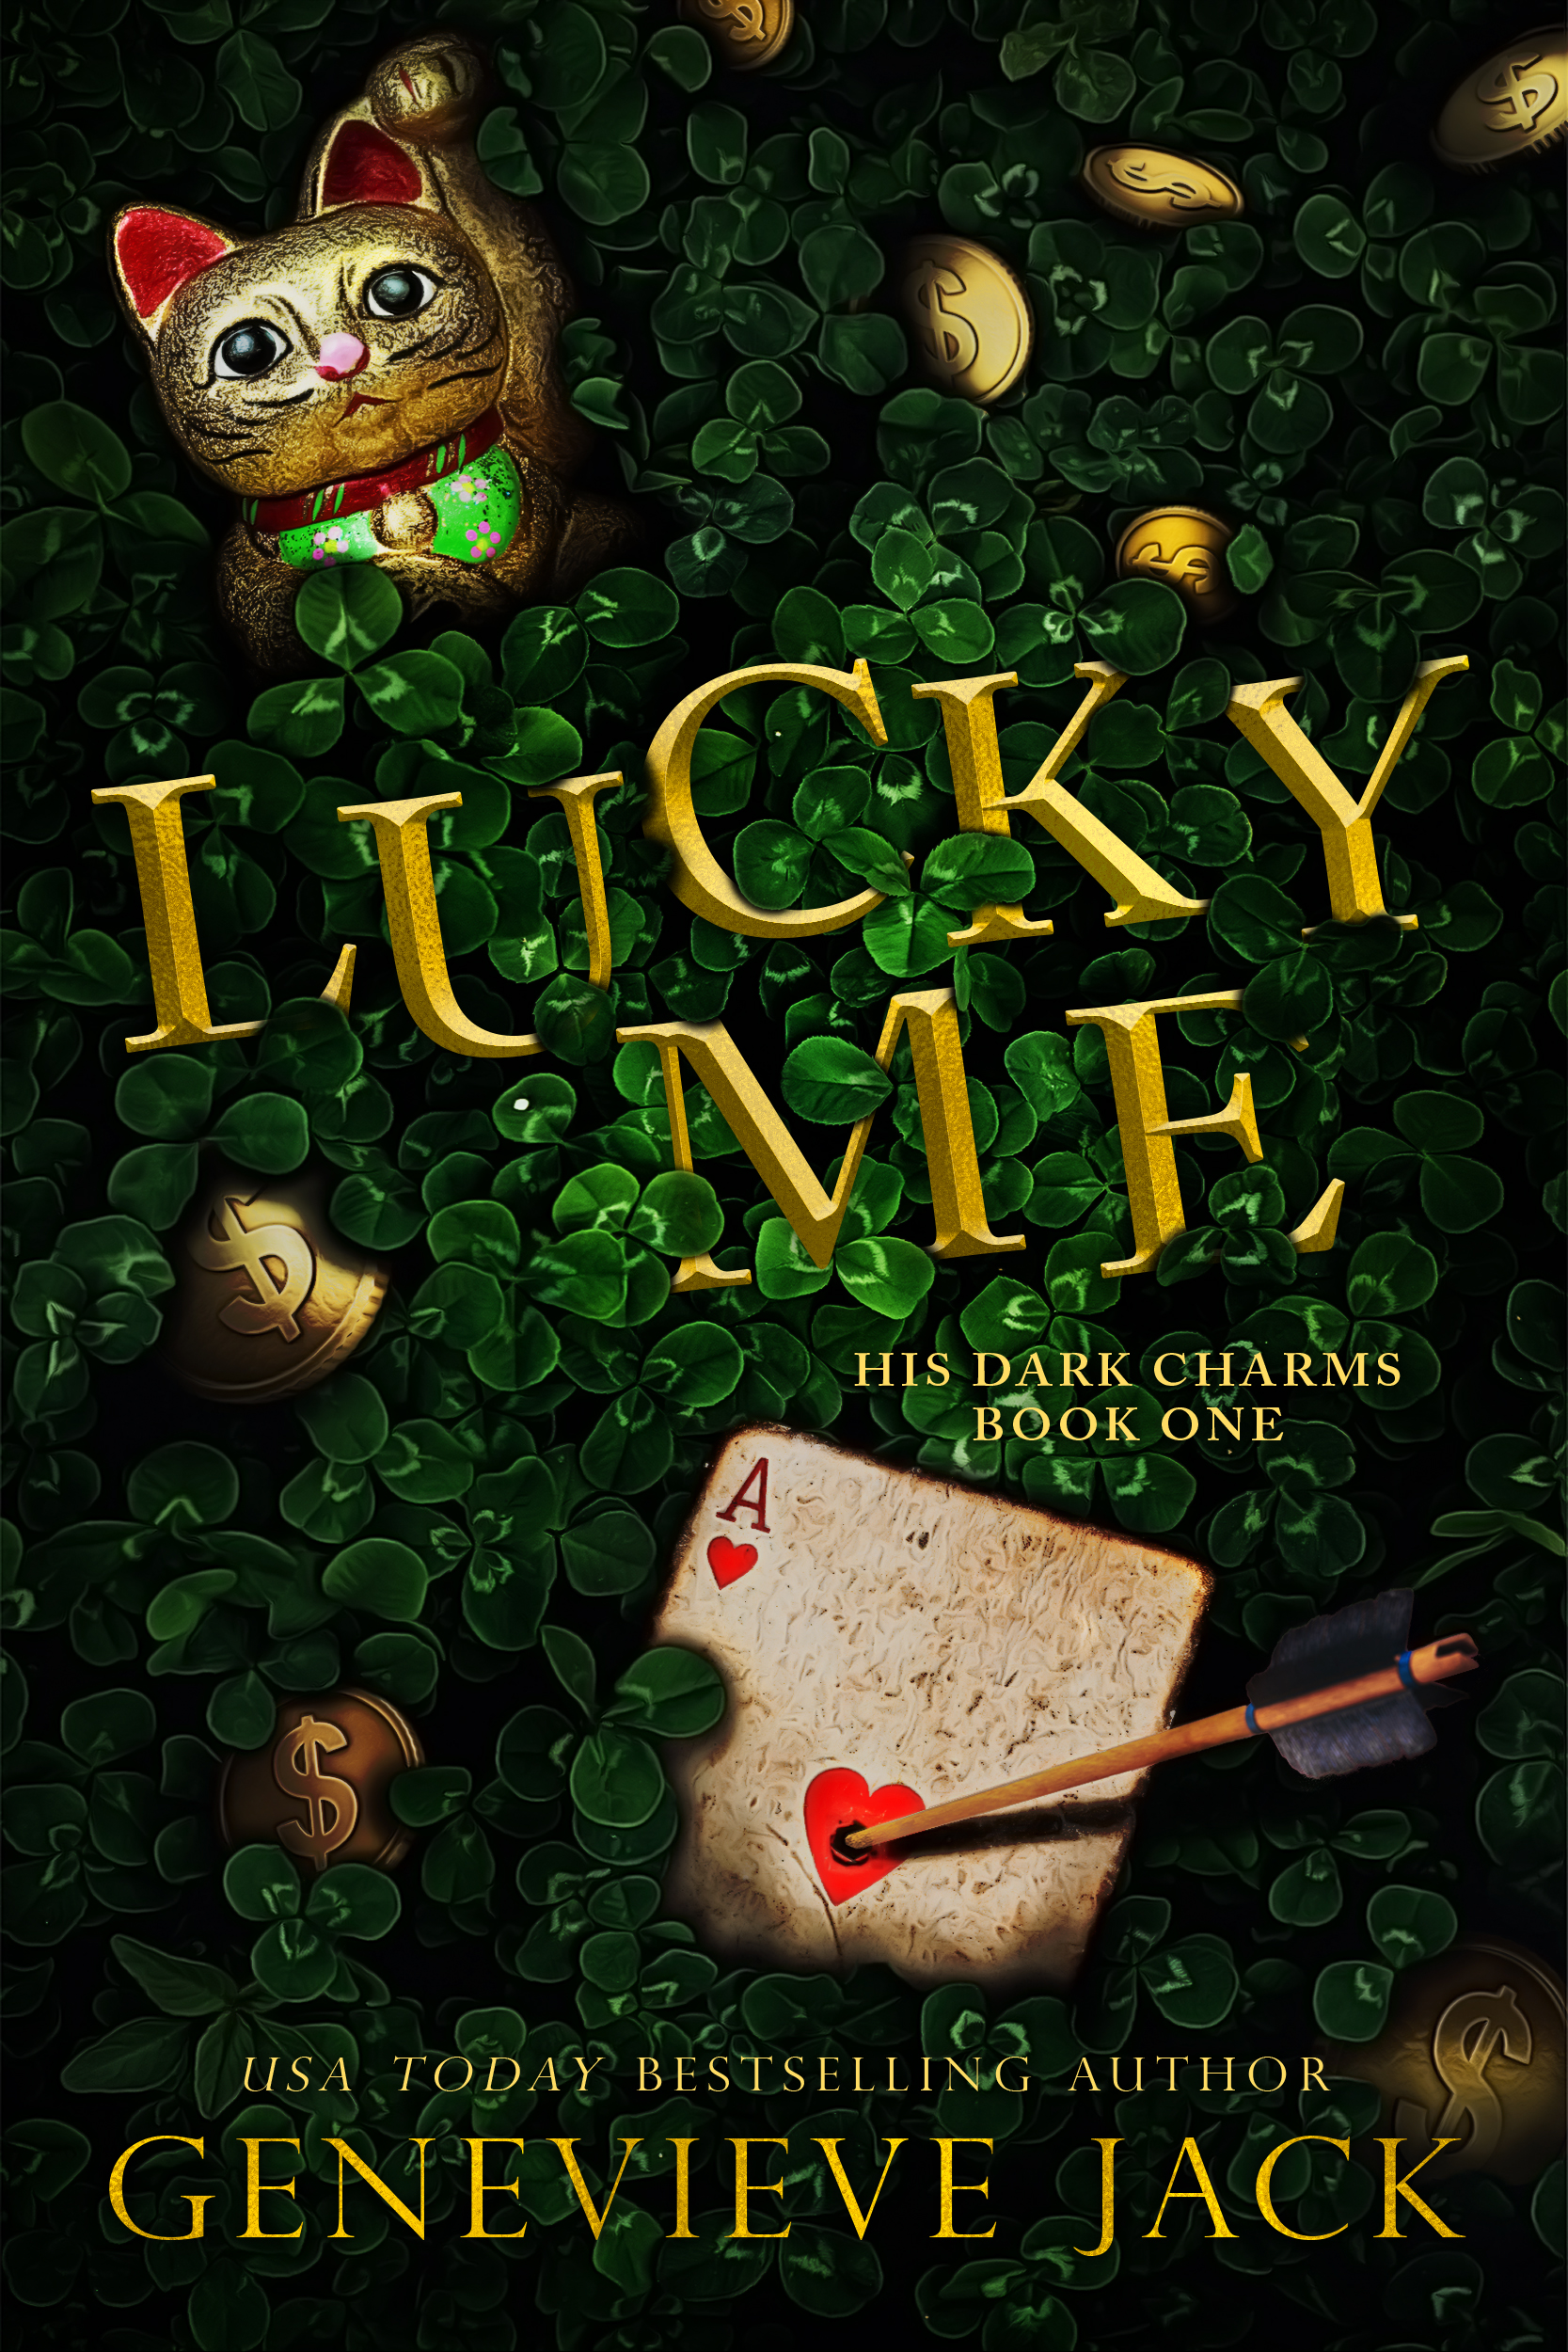 Lucky Me by Genevieve Jack PDF Download